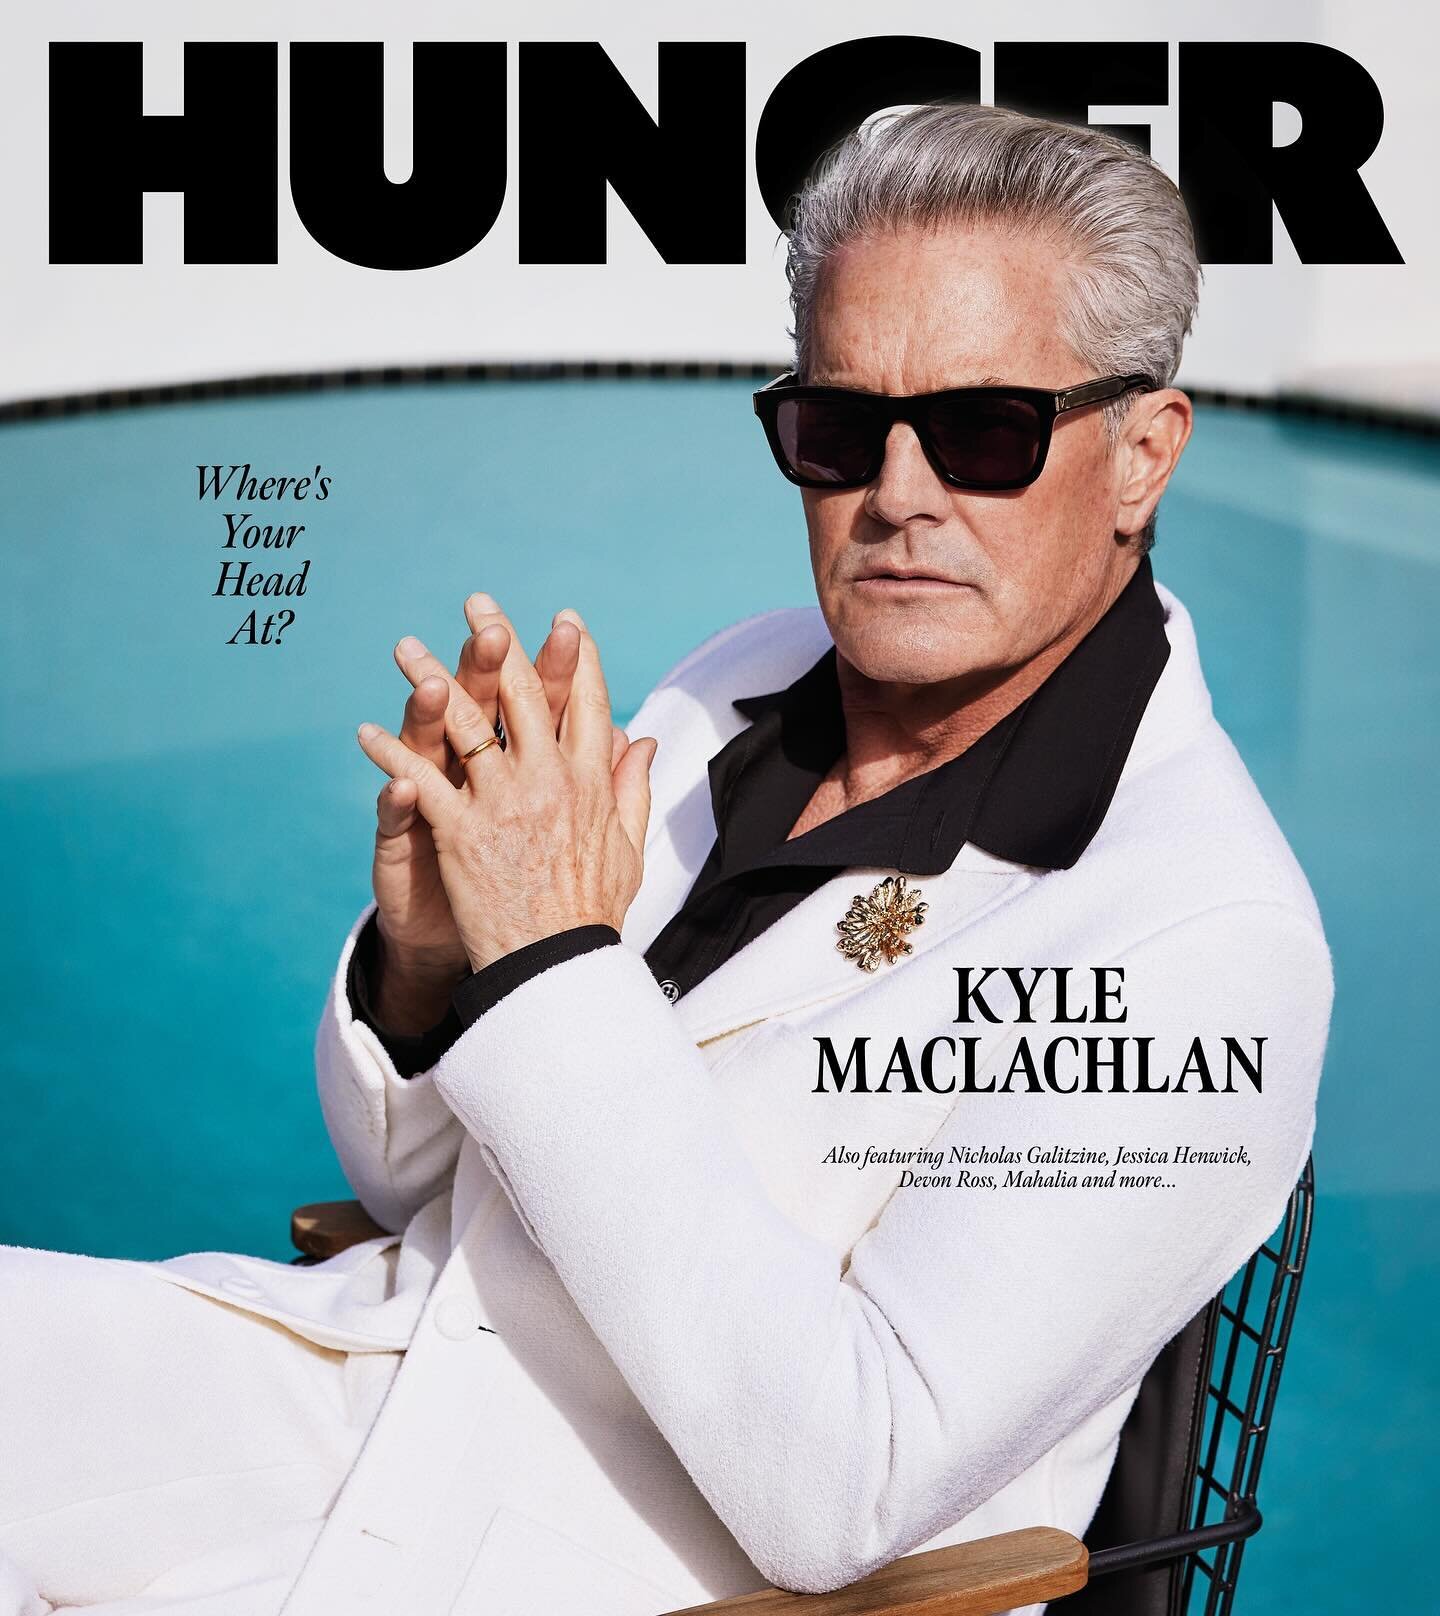 Out today! &ldquo;The nicest man in Hollywood&rdquo; and one and only @kyle_maclachlan in @hungermagazine reflecting on his career that has been anything but ordinary ✨🎬